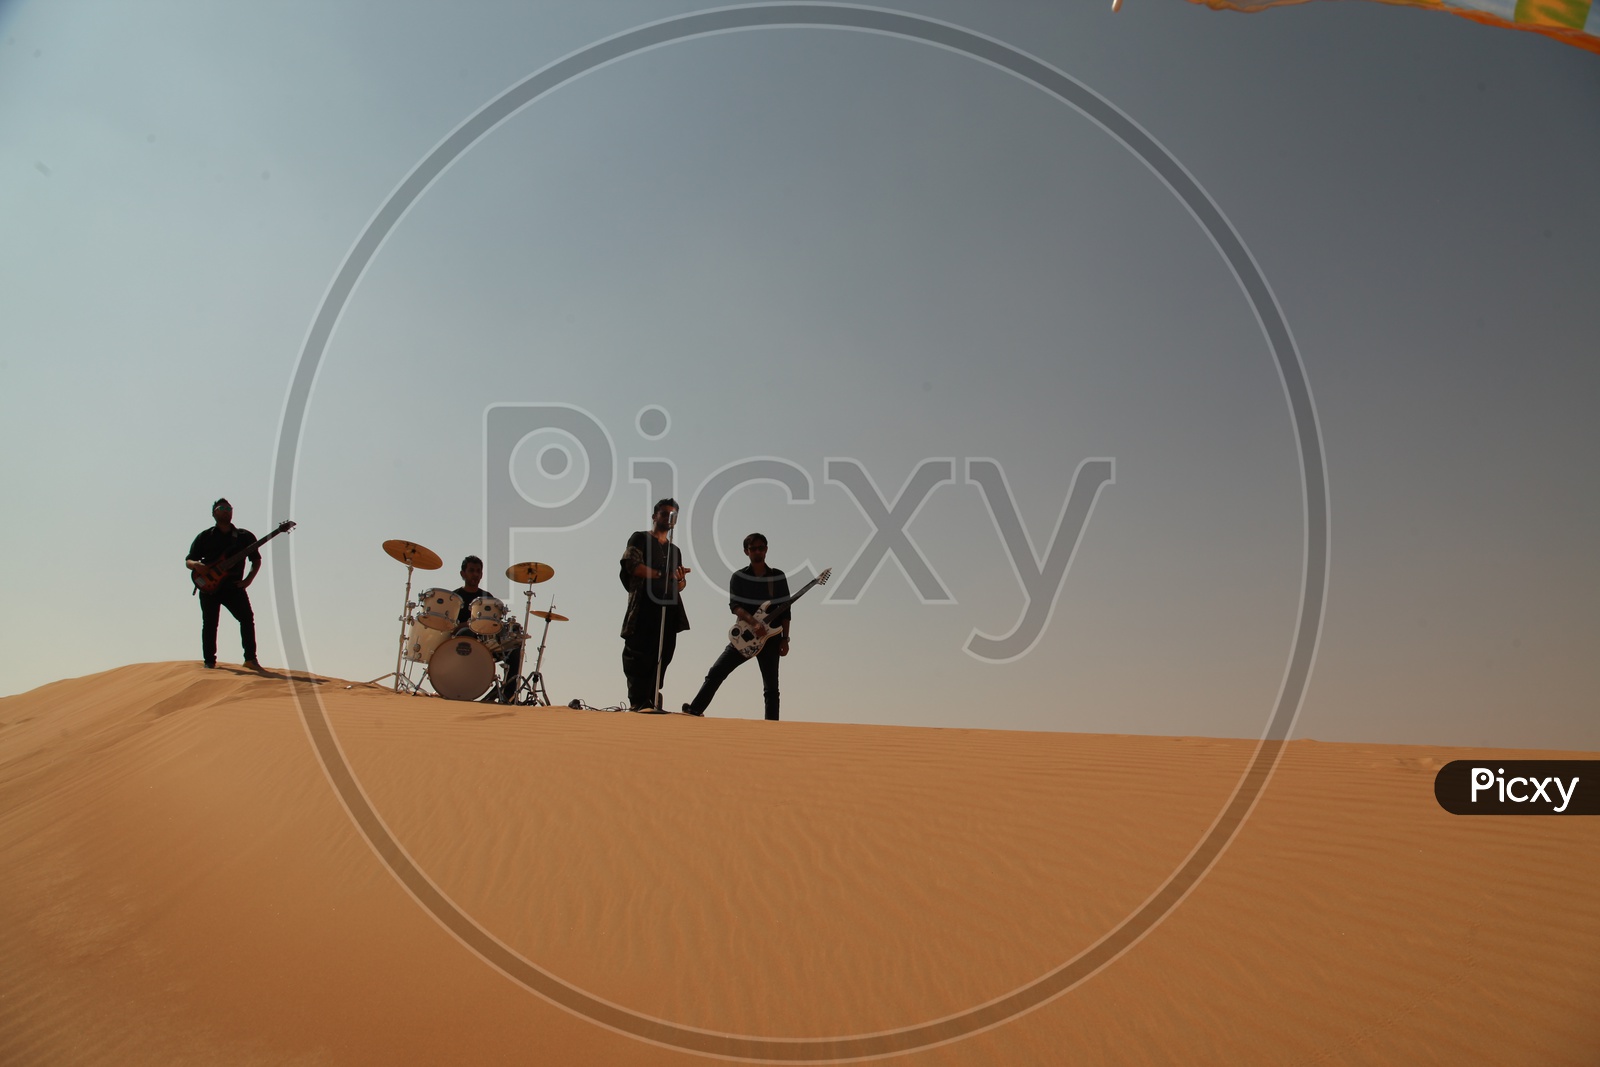 A Music Band Performing In Sand dunes of A Desert